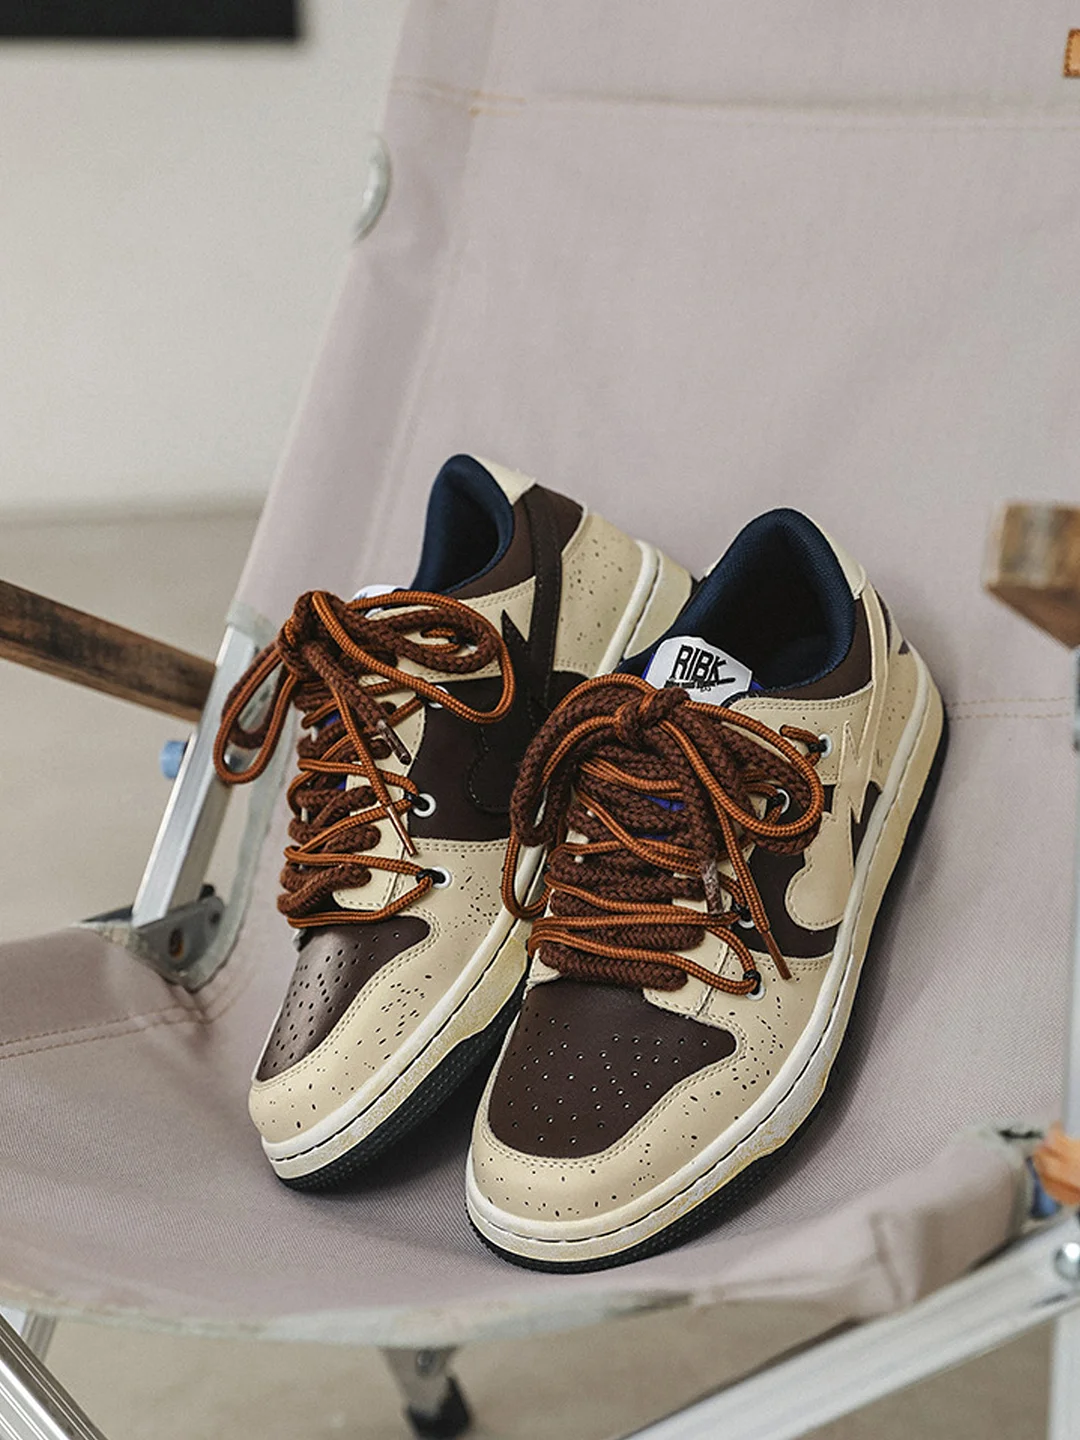 American High Street Love Sneakers For Couples